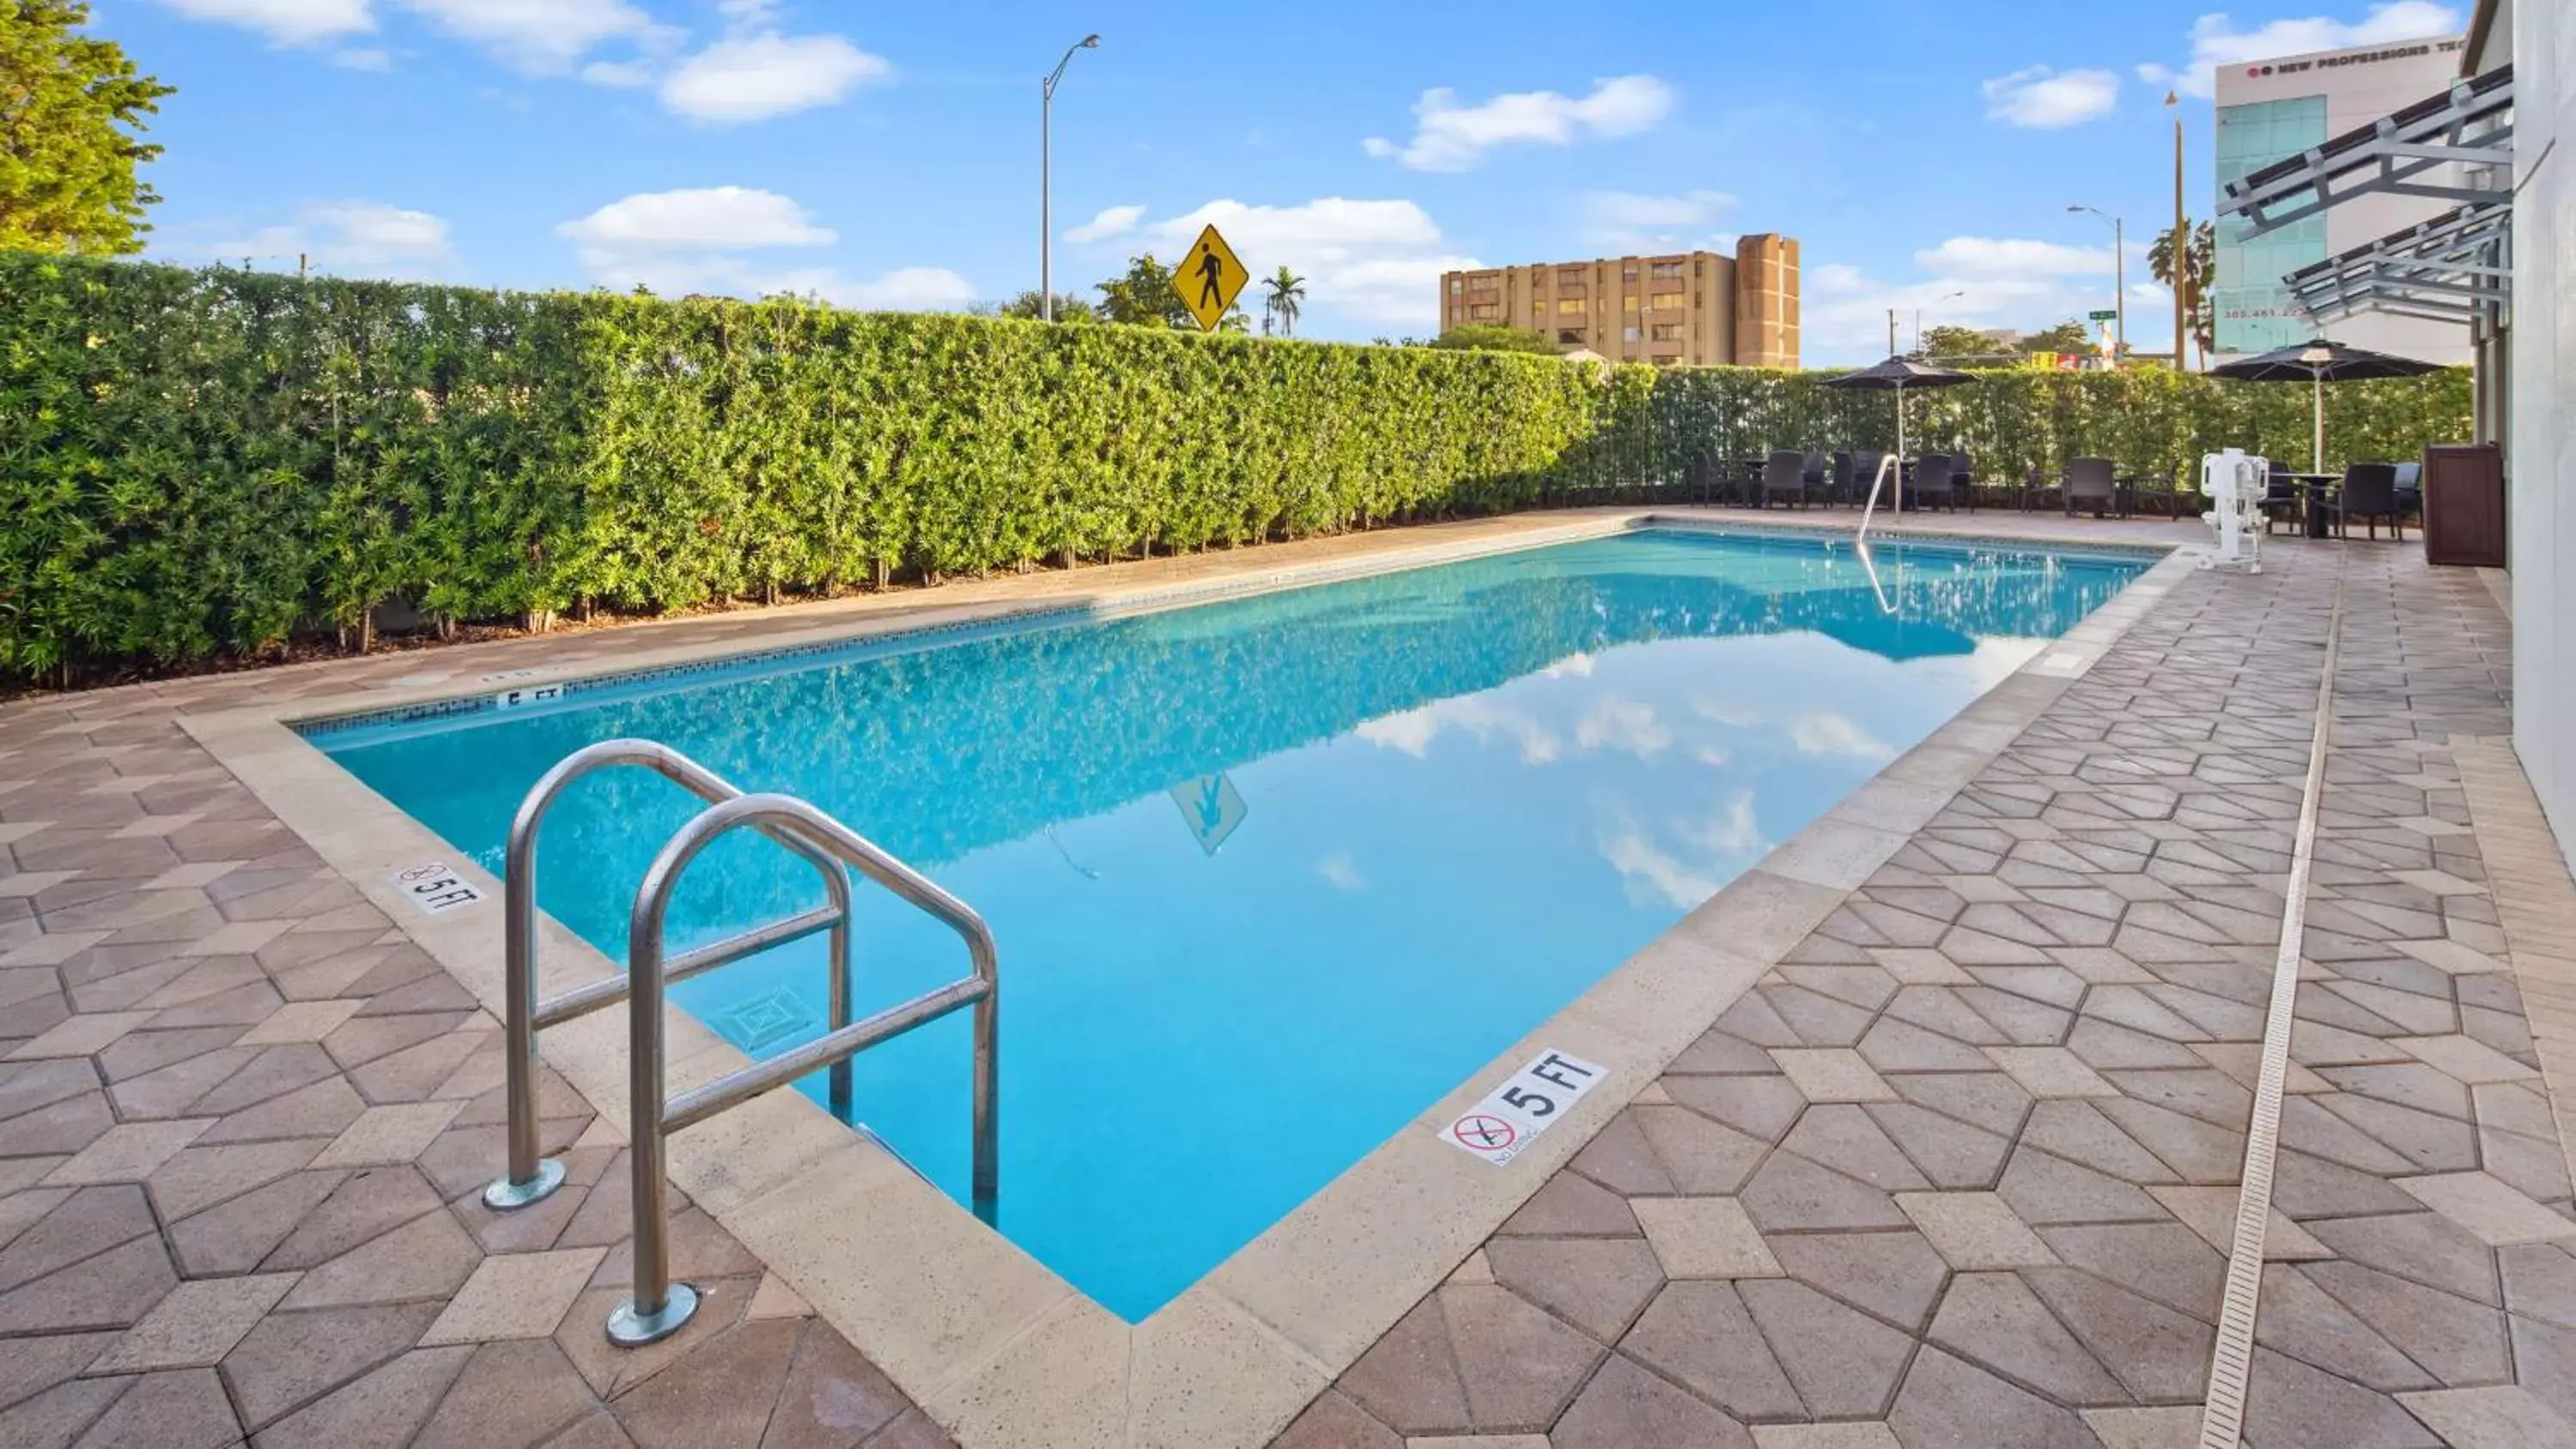 On site, Swimming Pool in Best Western Premier Miami International Airport Hotel & Suites Coral Gables